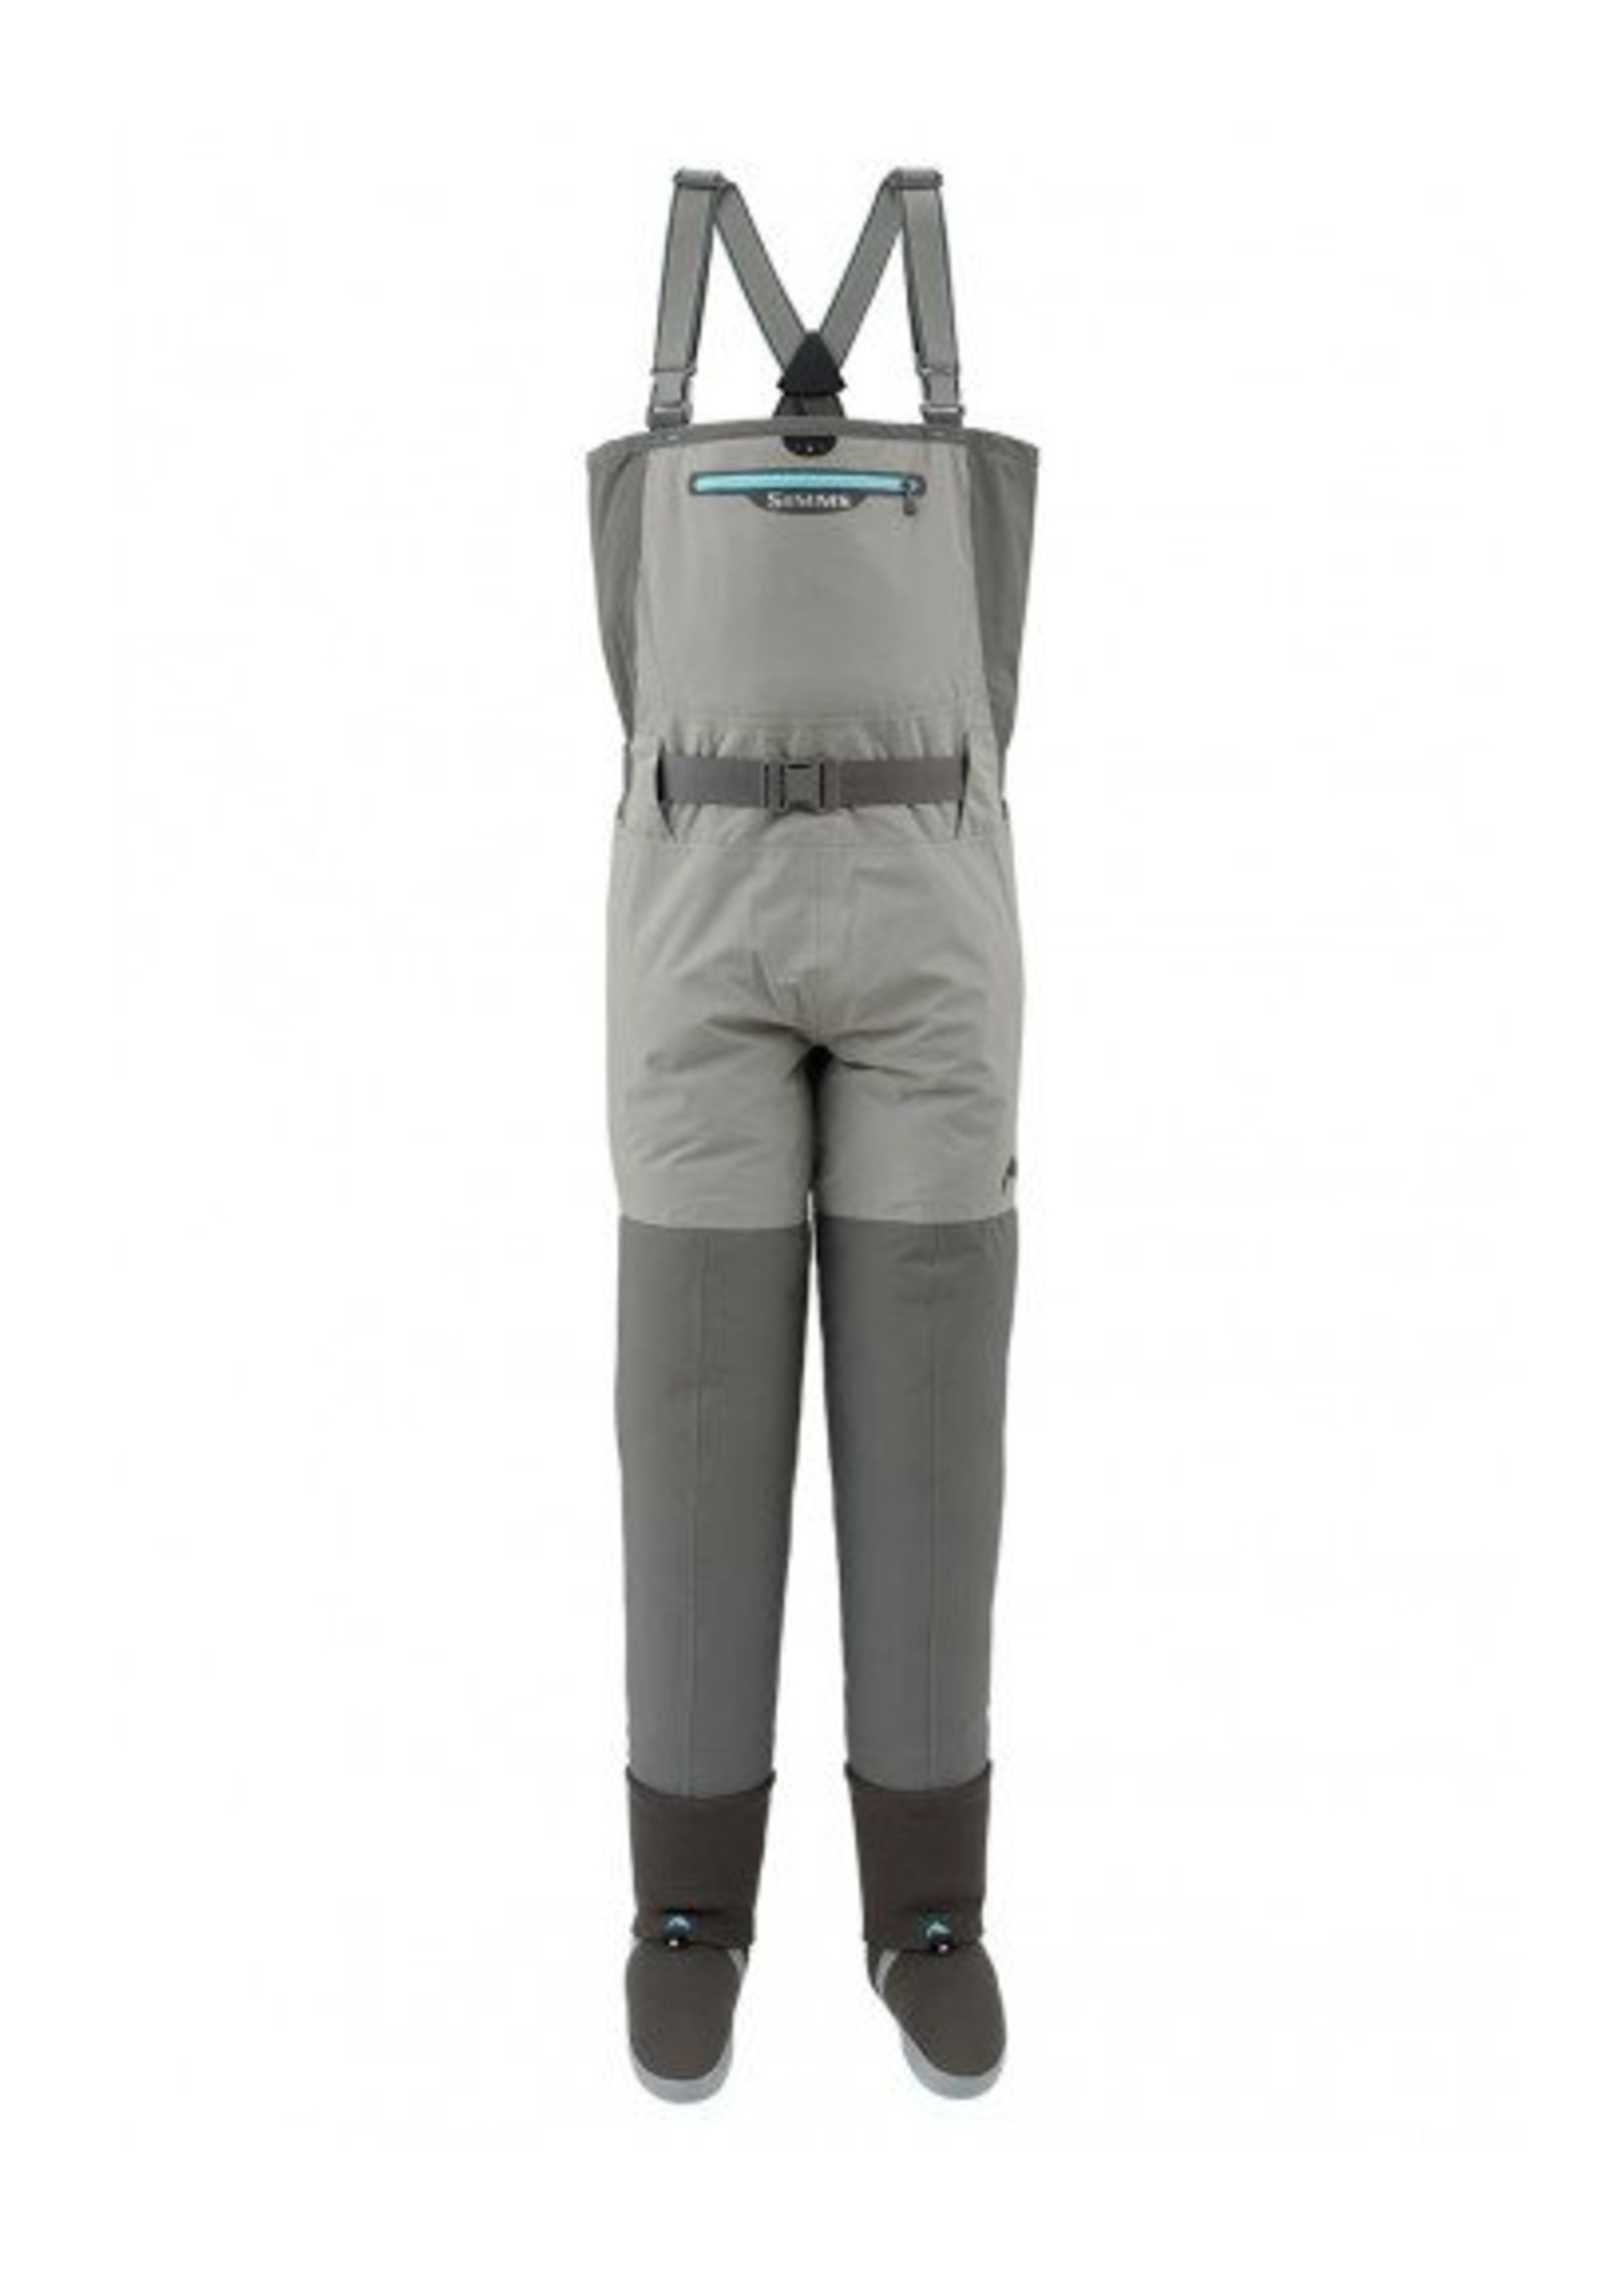 S14 Wader Women's DRYFT™ Fishing Waders, 53% OFF